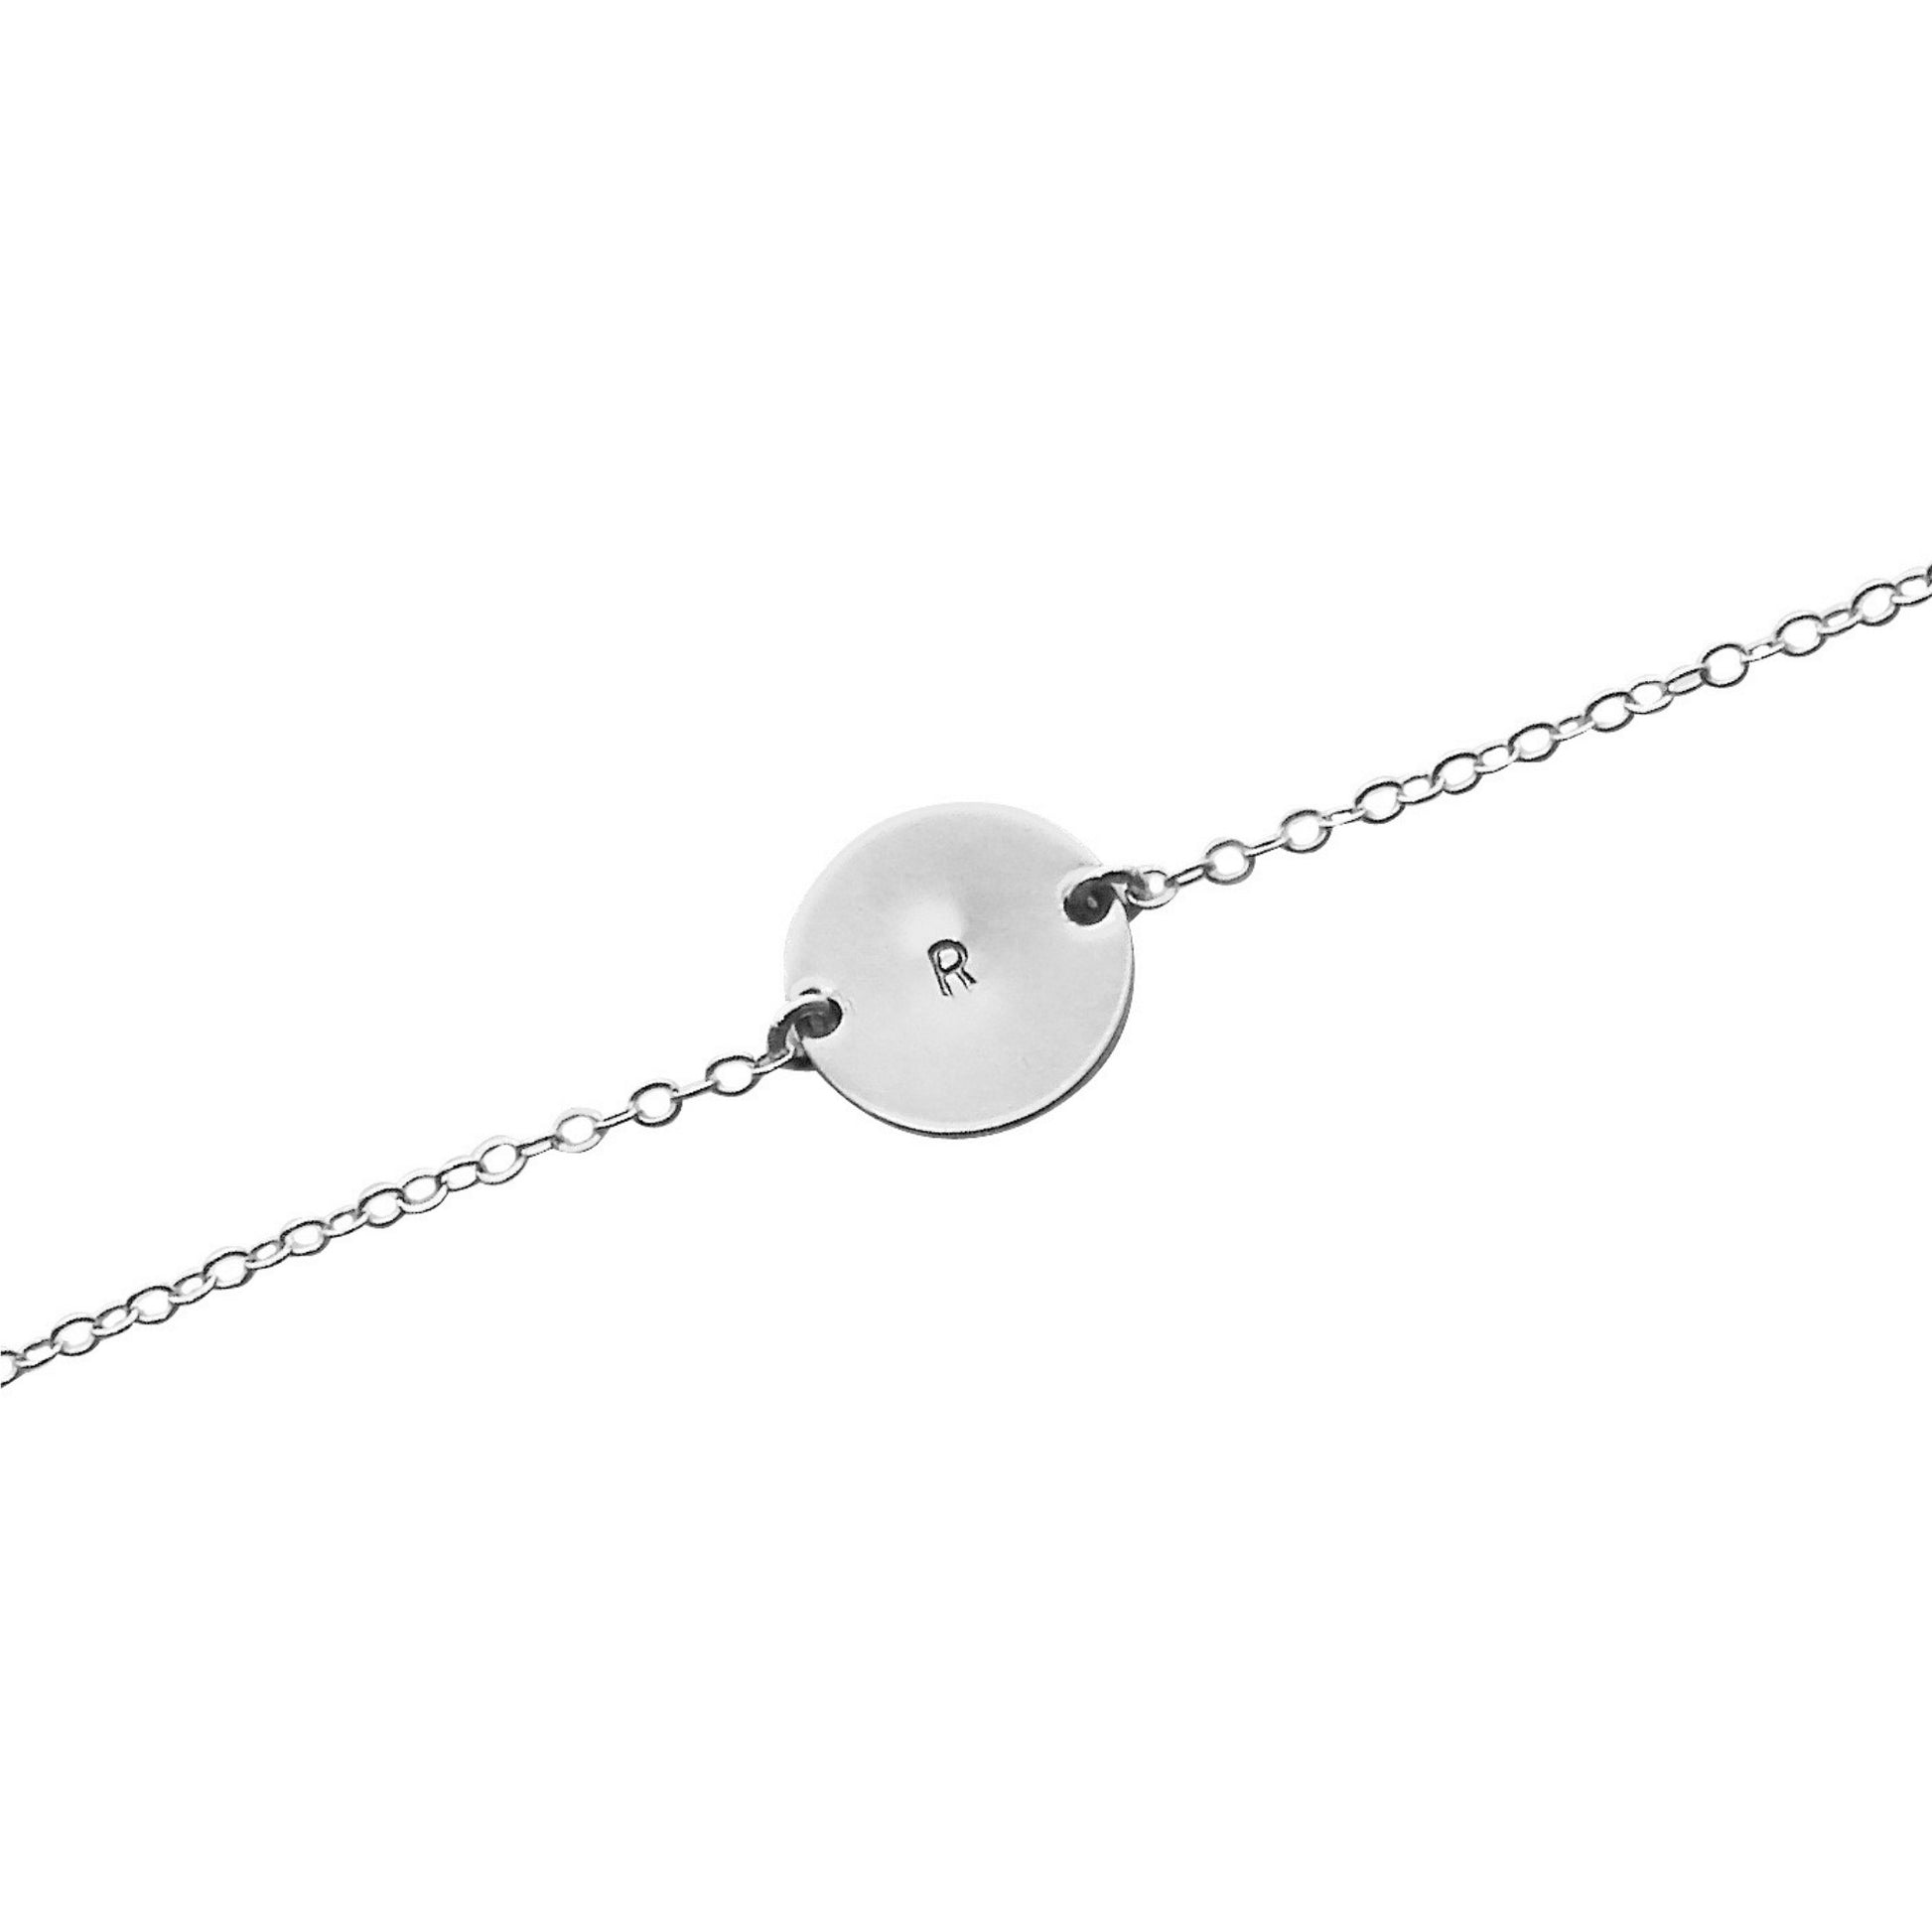 Silver Initial This bracelet